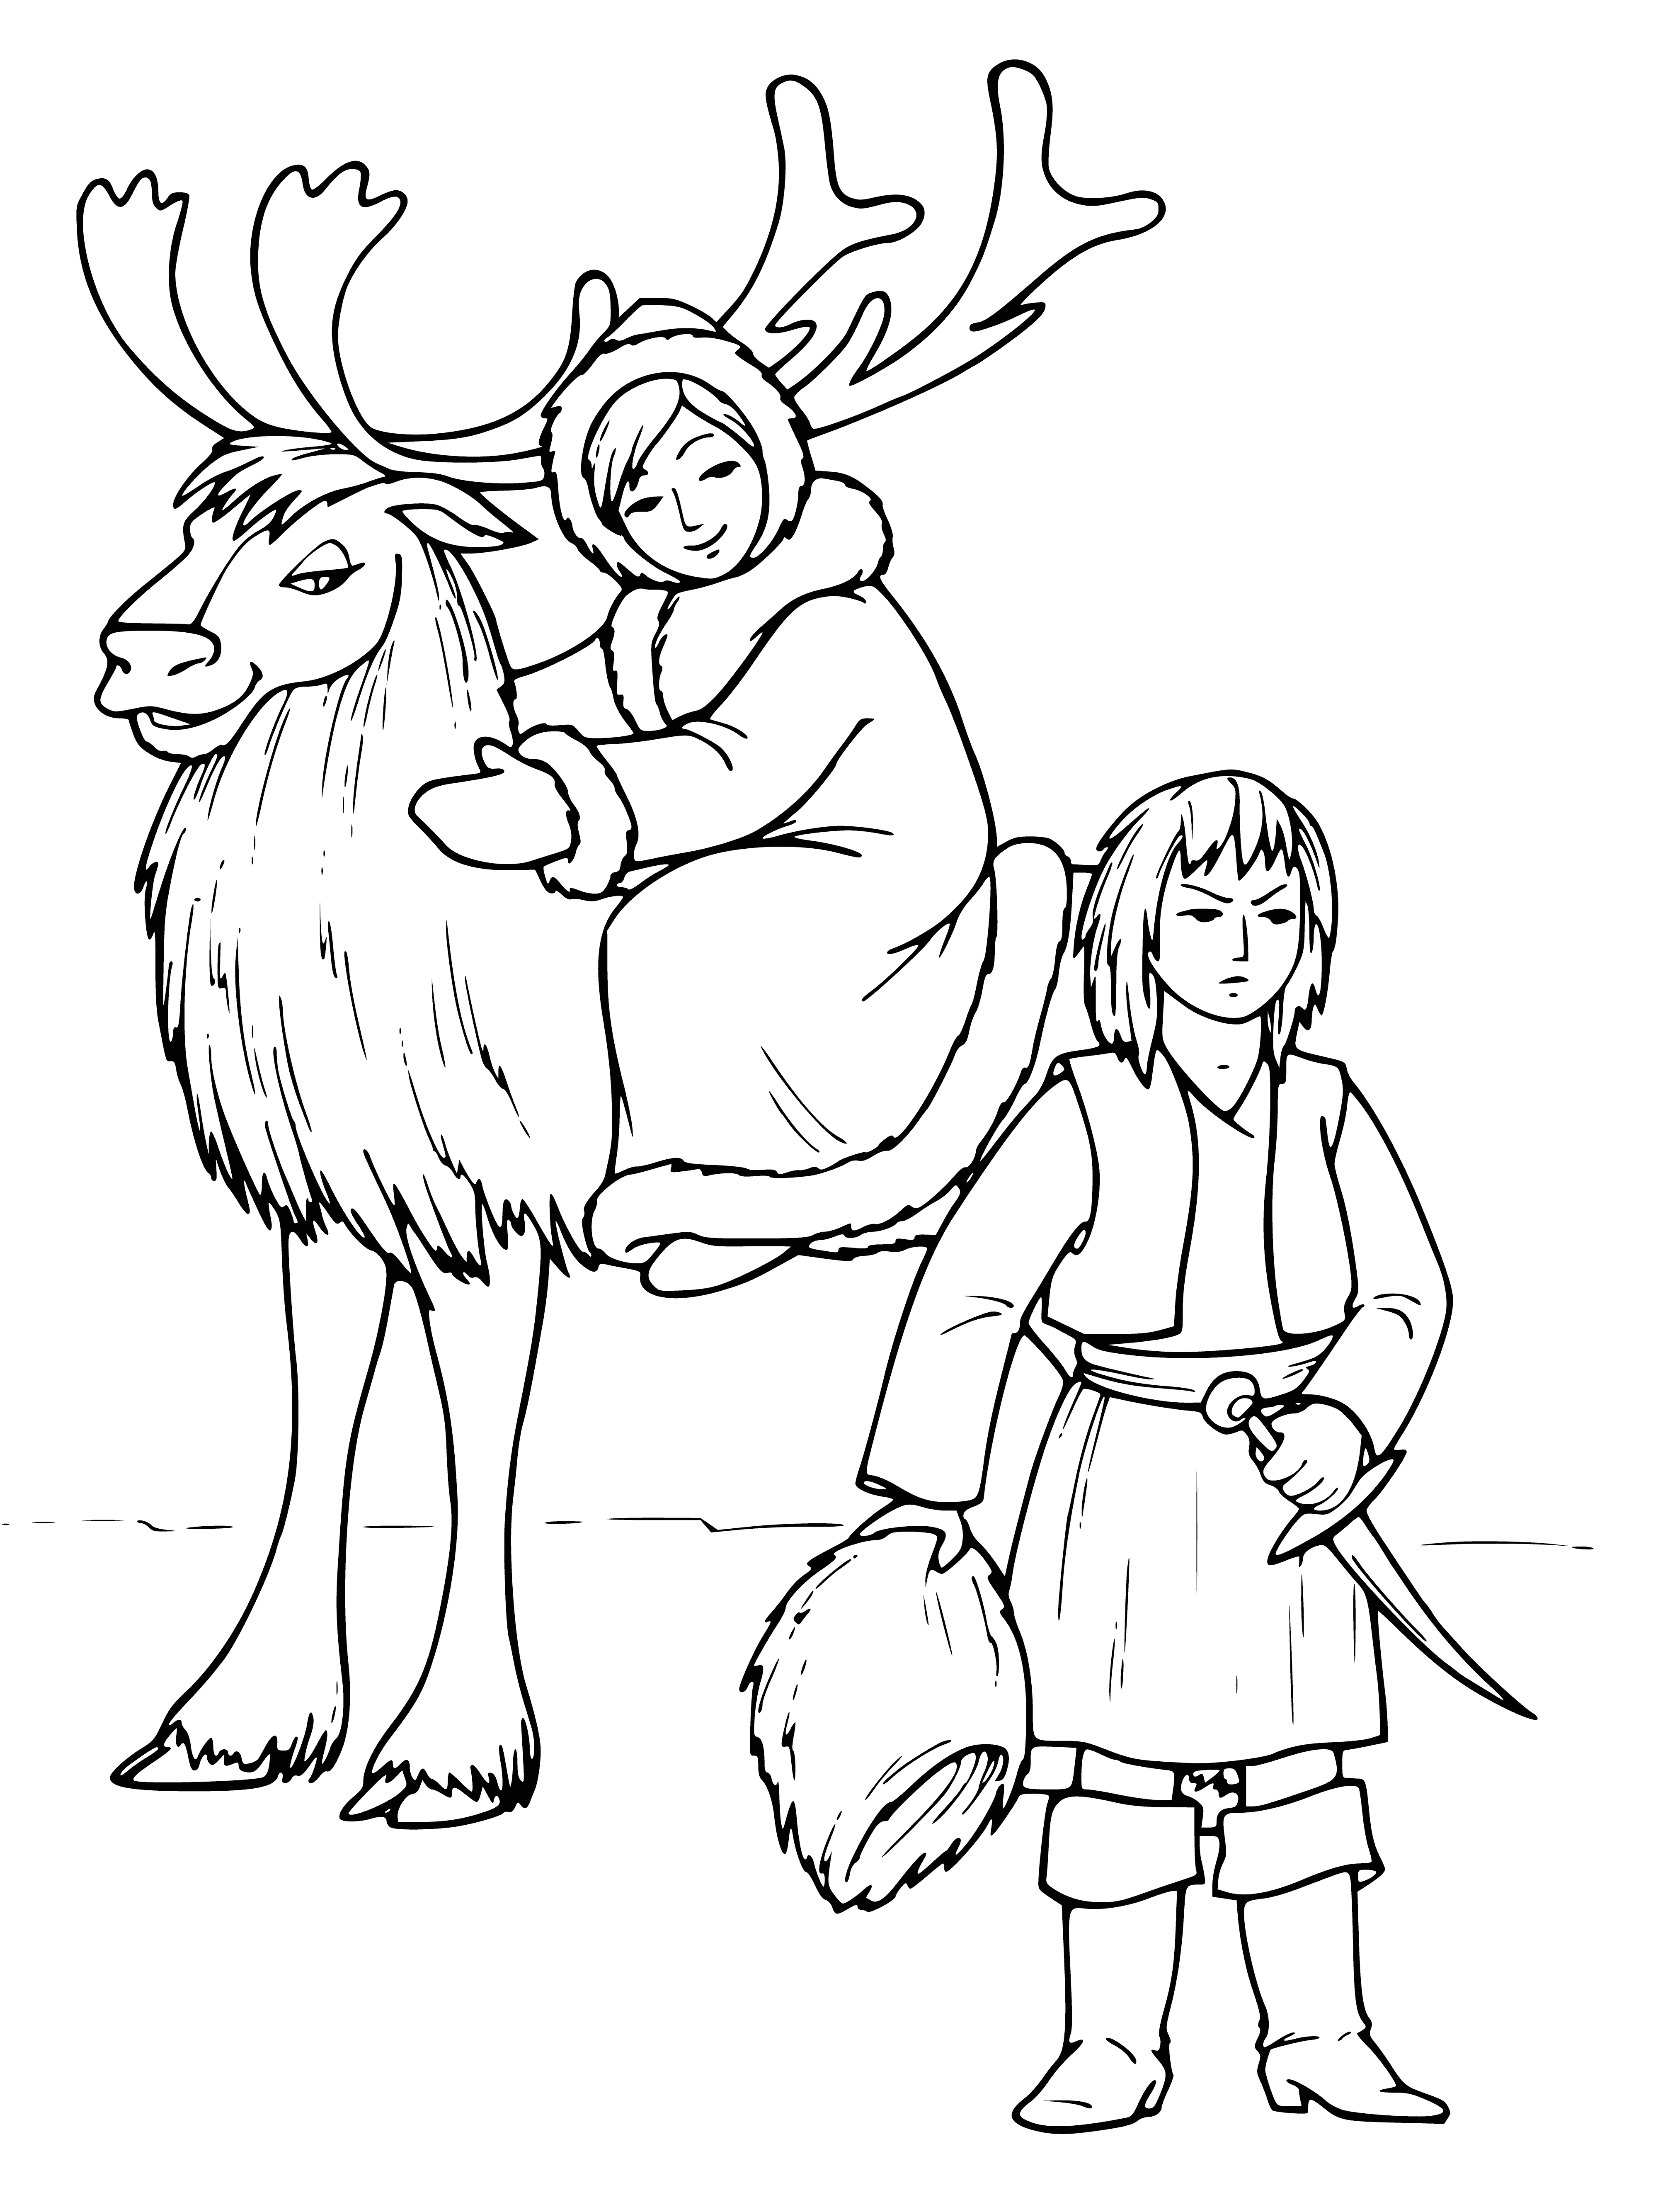 The little robber and Gerda coloring page